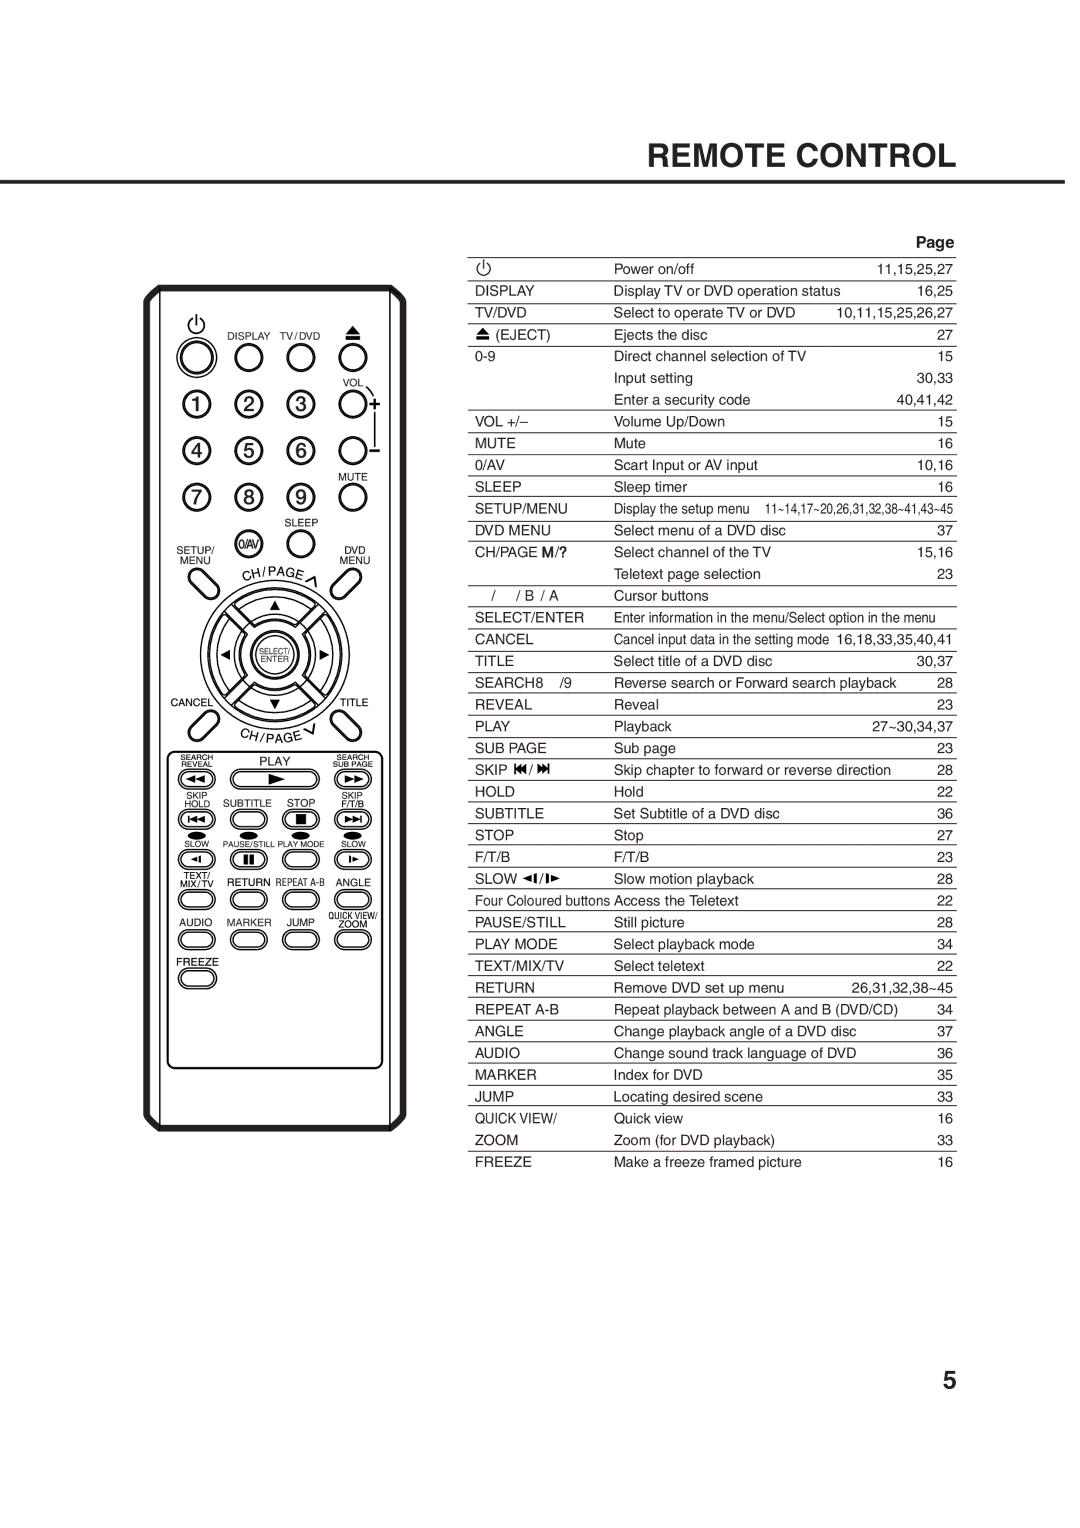 Orion 14LD manual Remote Control, Eject 